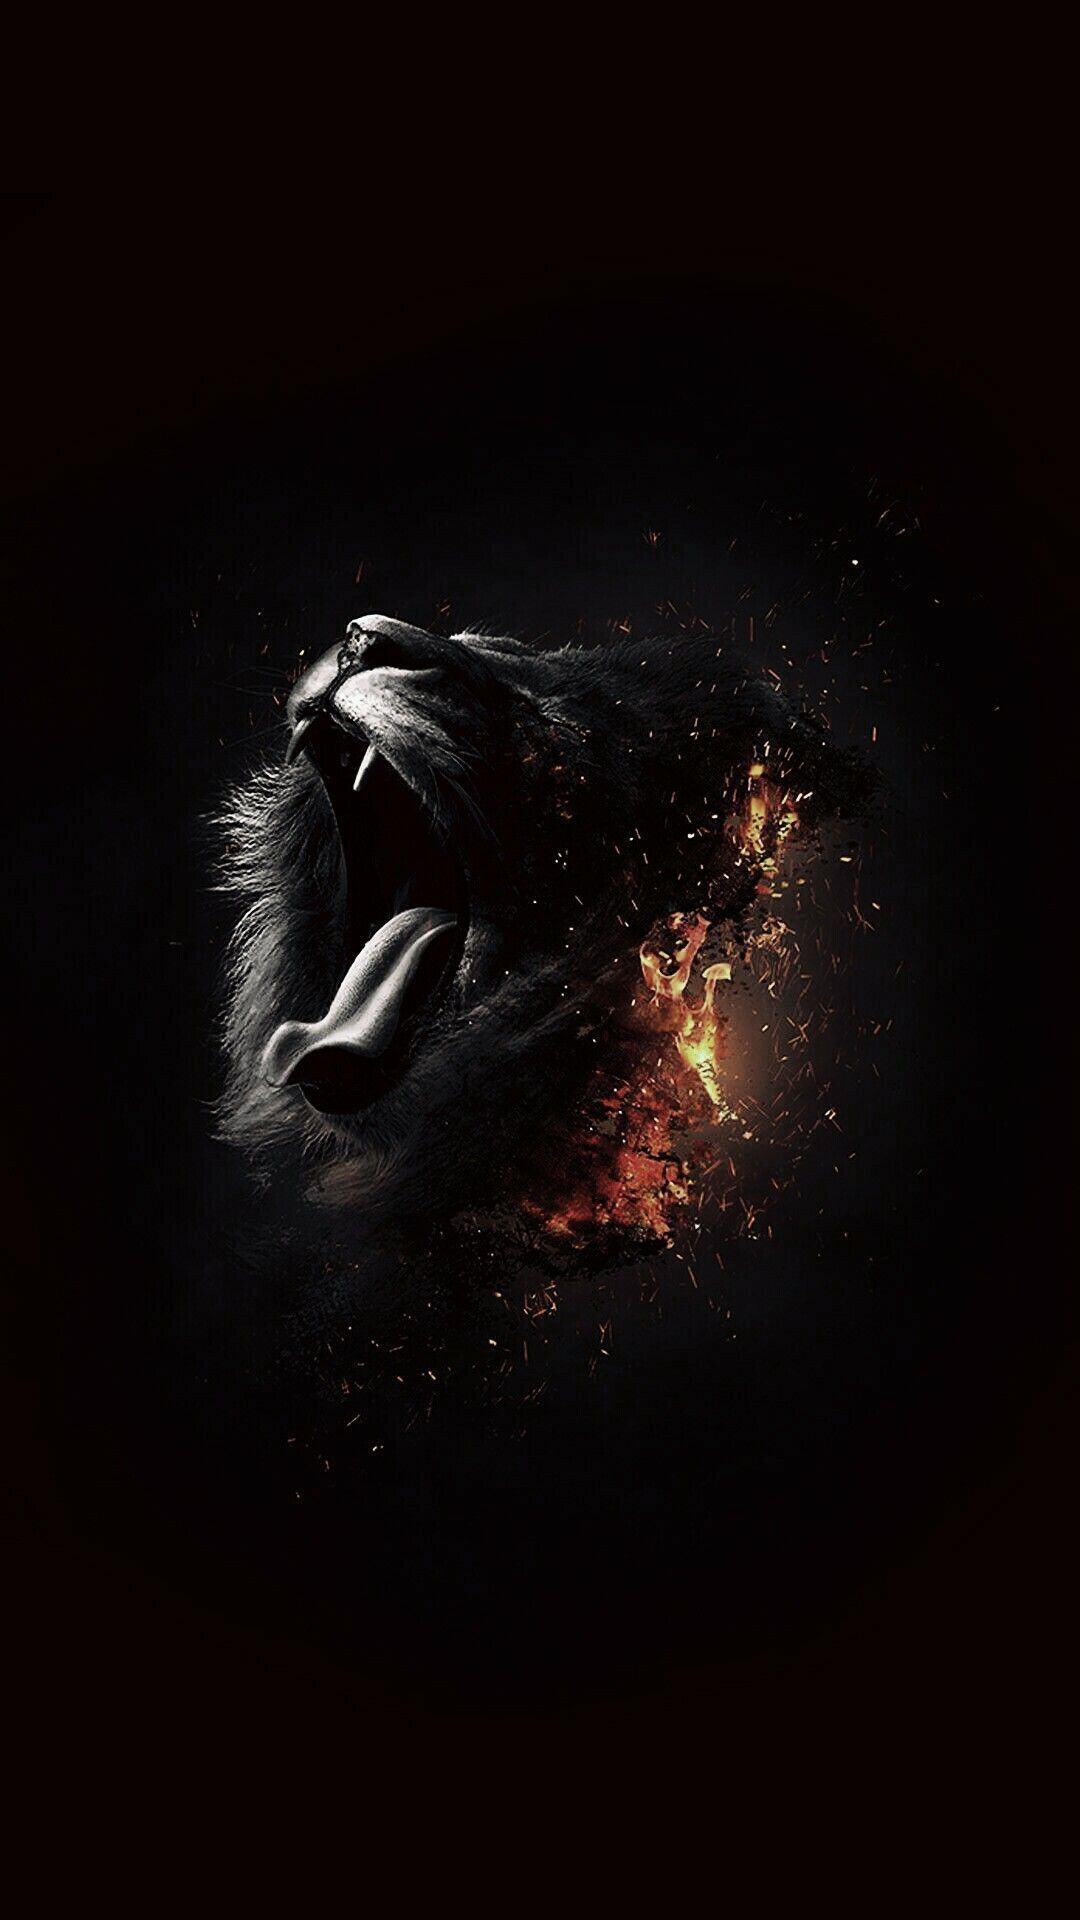 Badass Aesthetic Background Picture Is Best Wallpaper on flowerswallpaper.info, if you like it.. Lion wallpaper, Lion wallpaper iphone, iPhone wallpaper iphone x